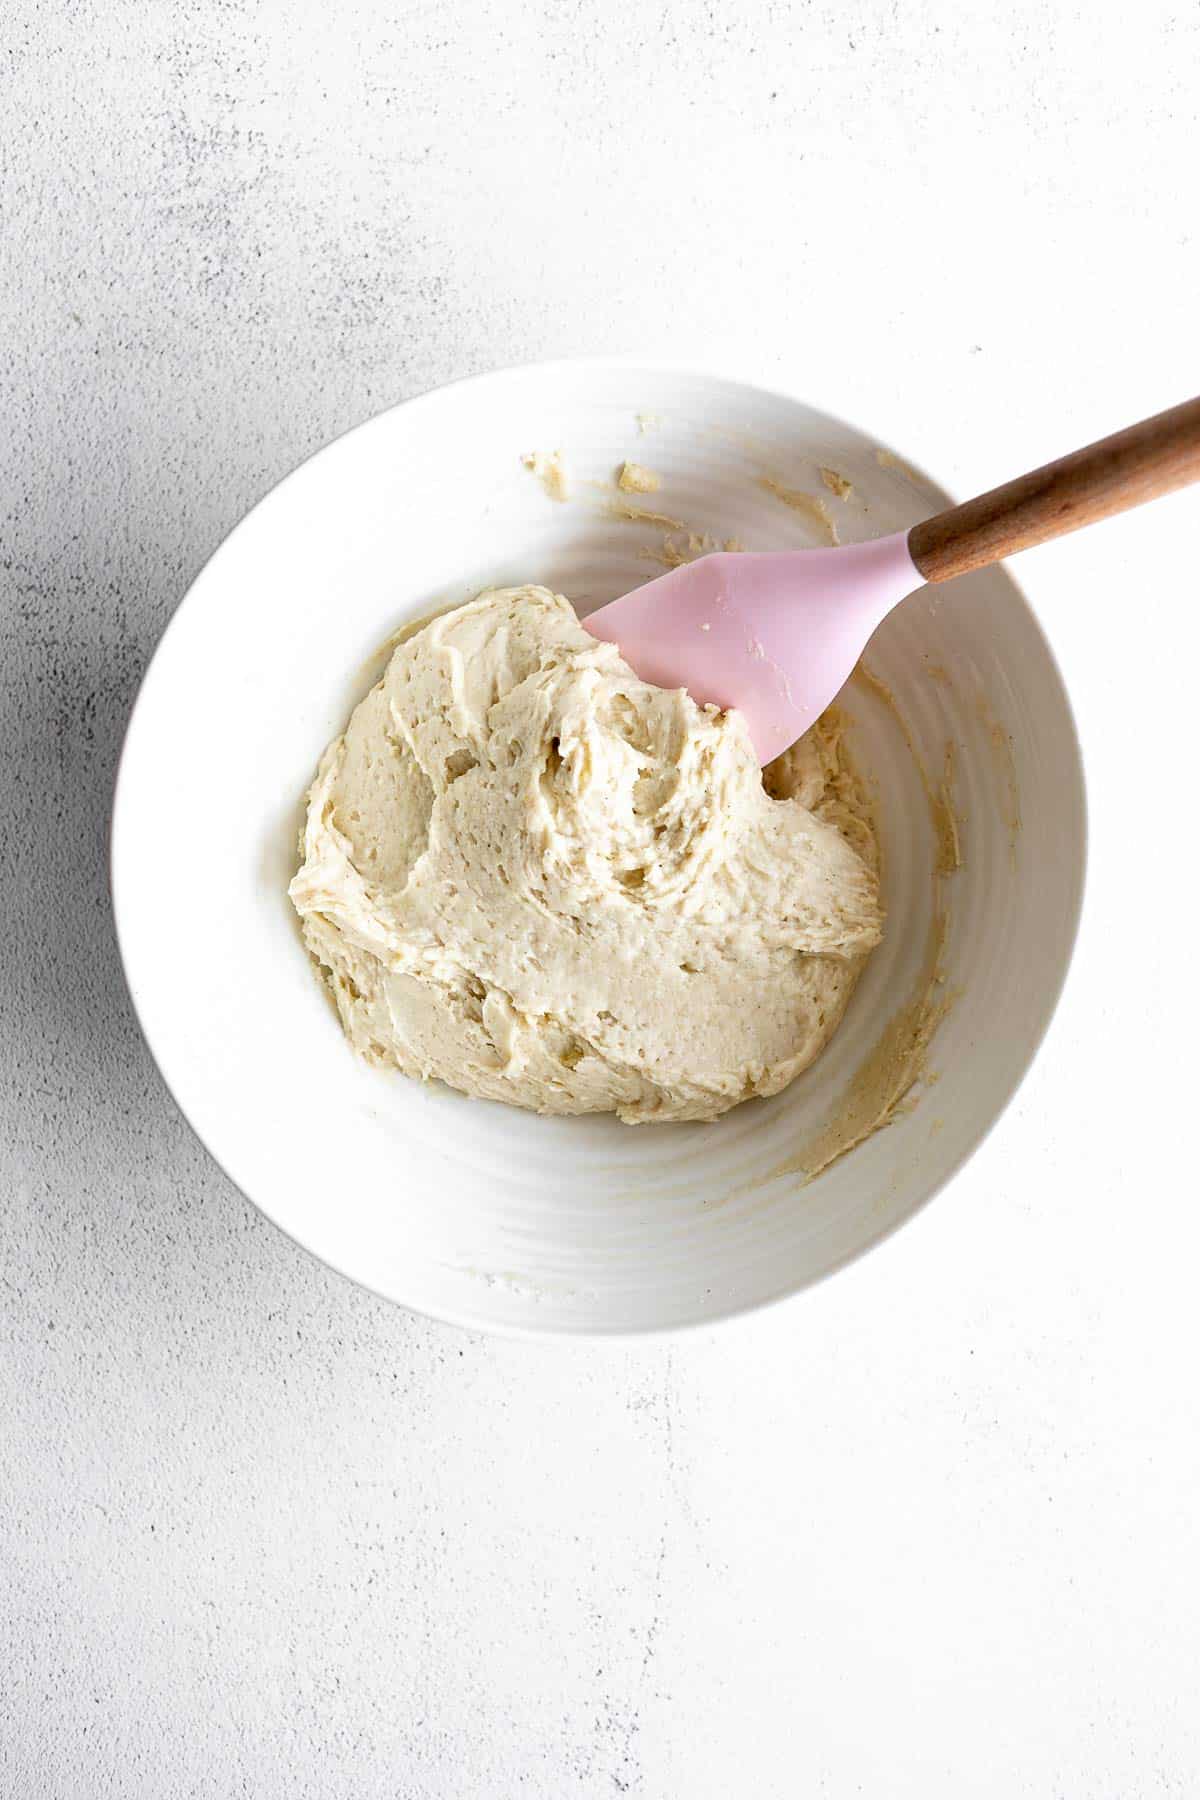 dough in a bowl with a wooden spoon on the side